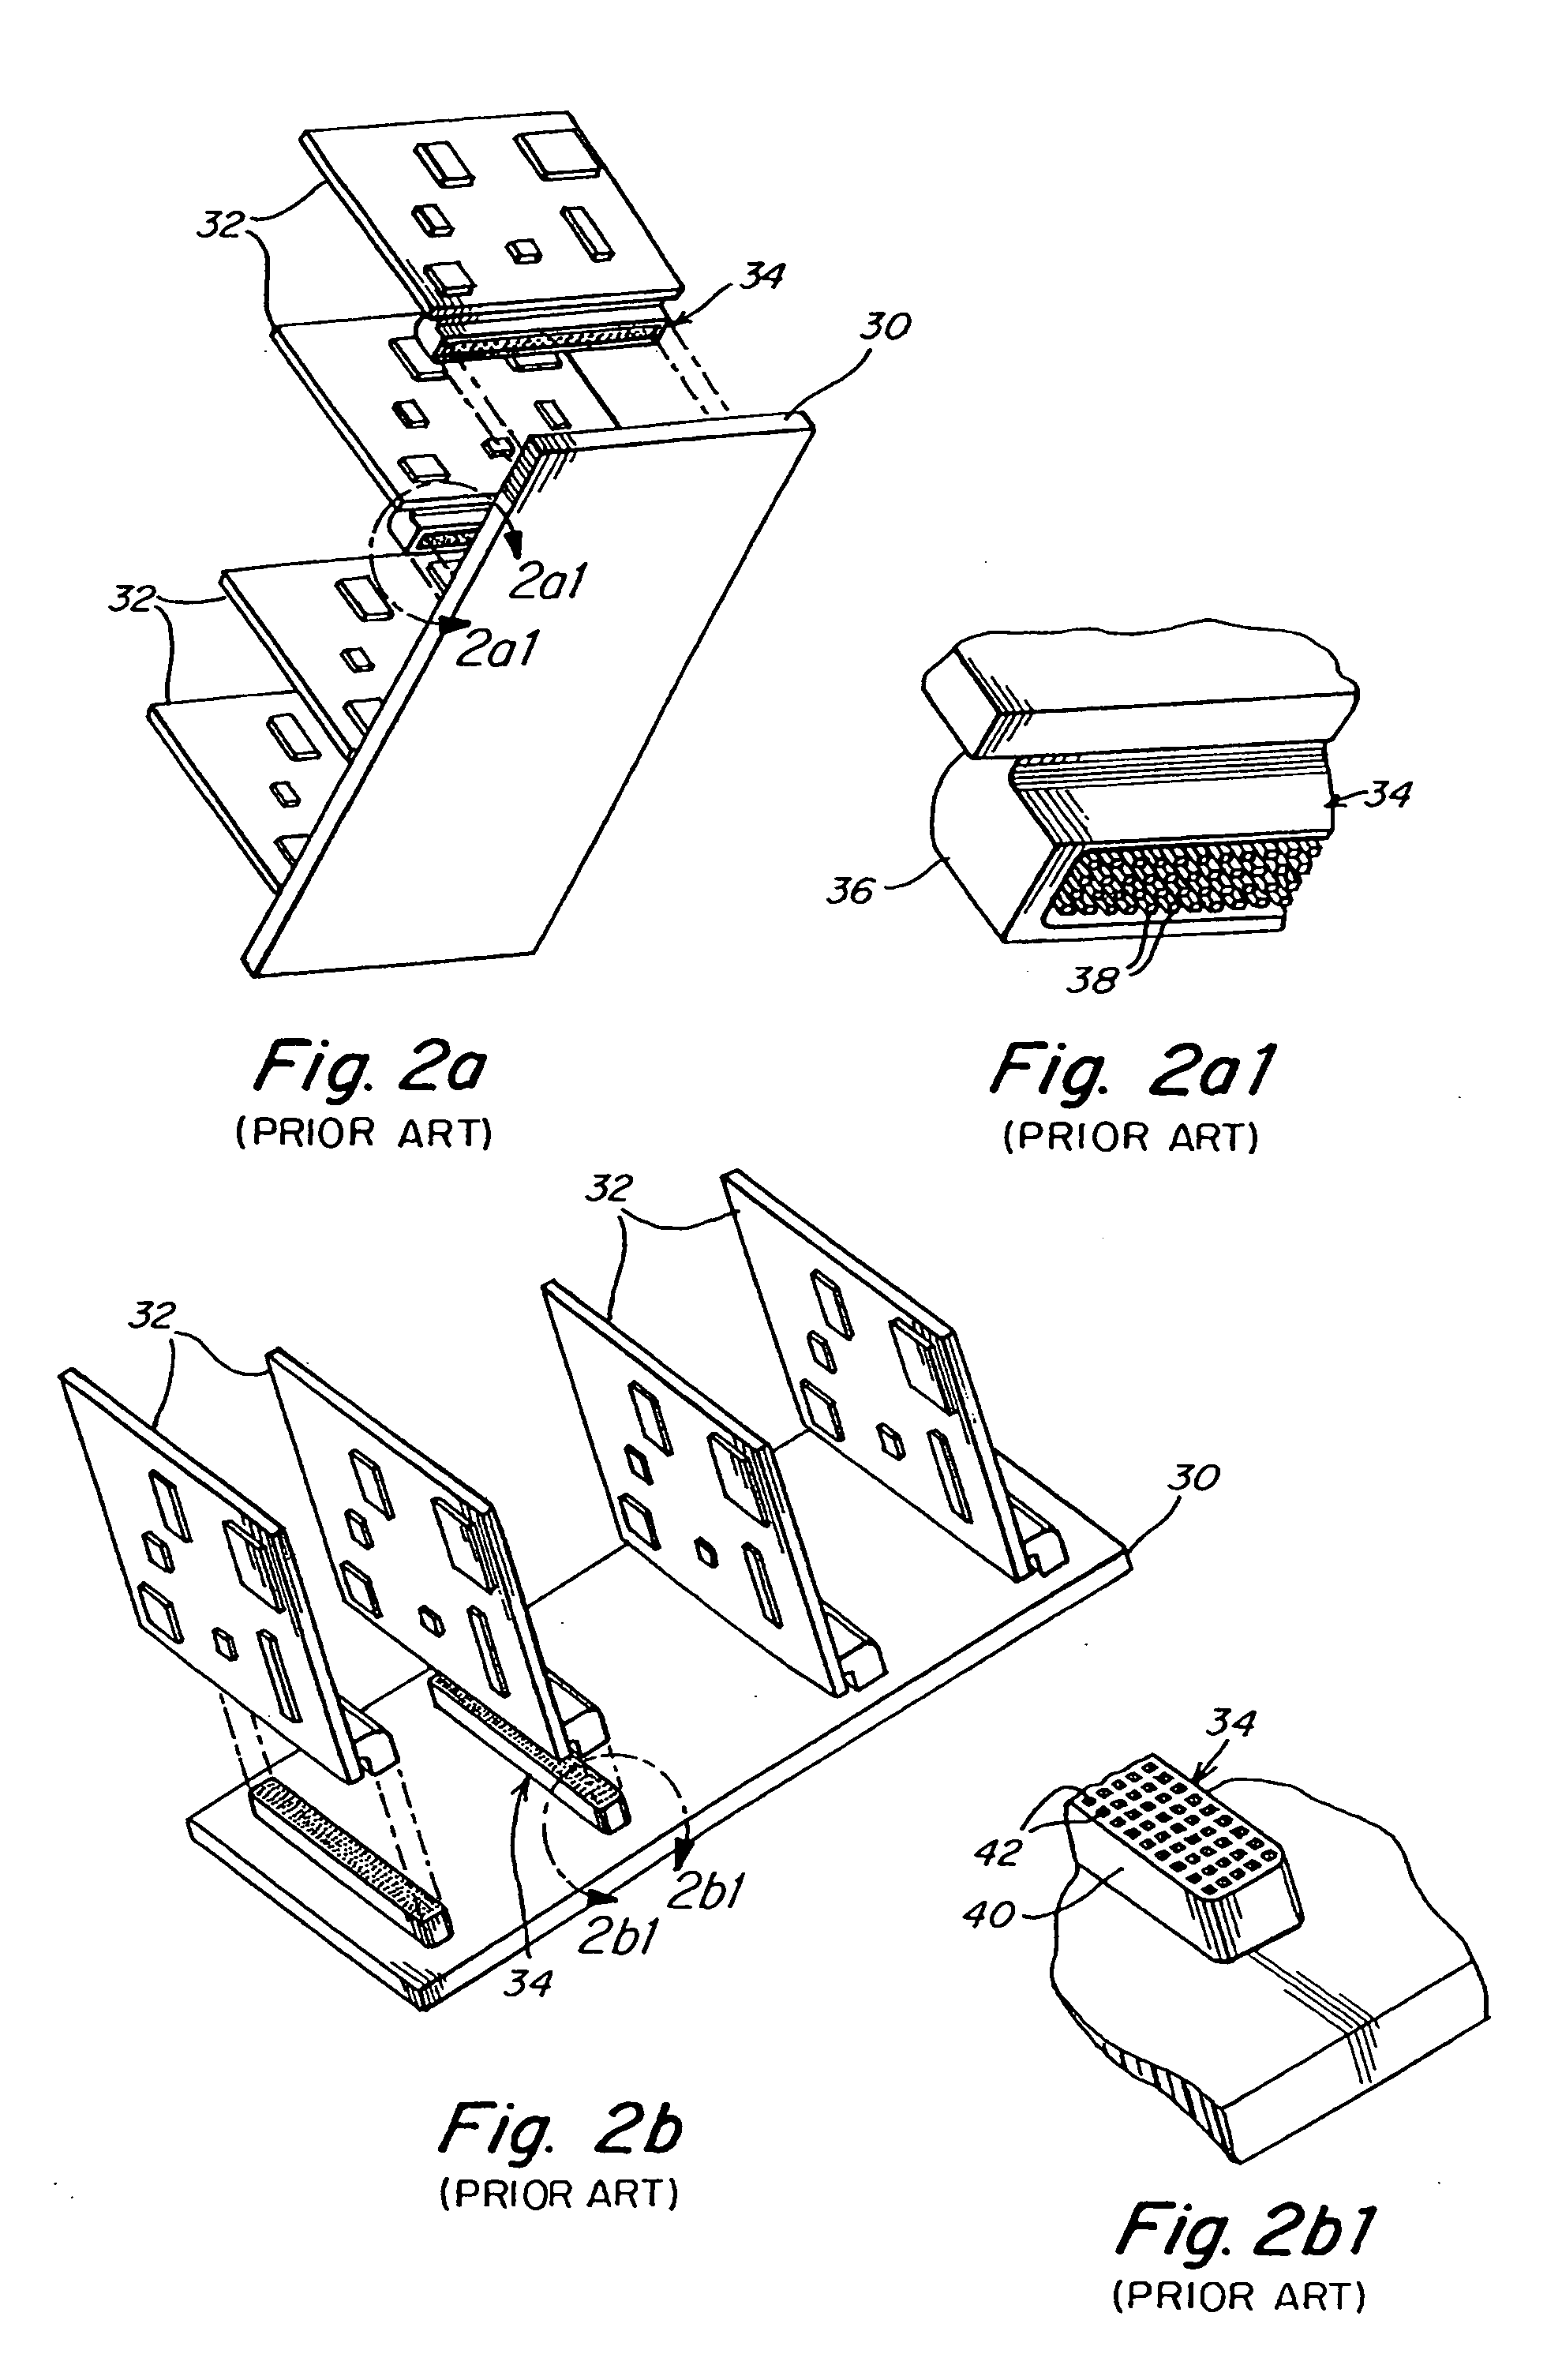 Multiple-contact woven electrical switches